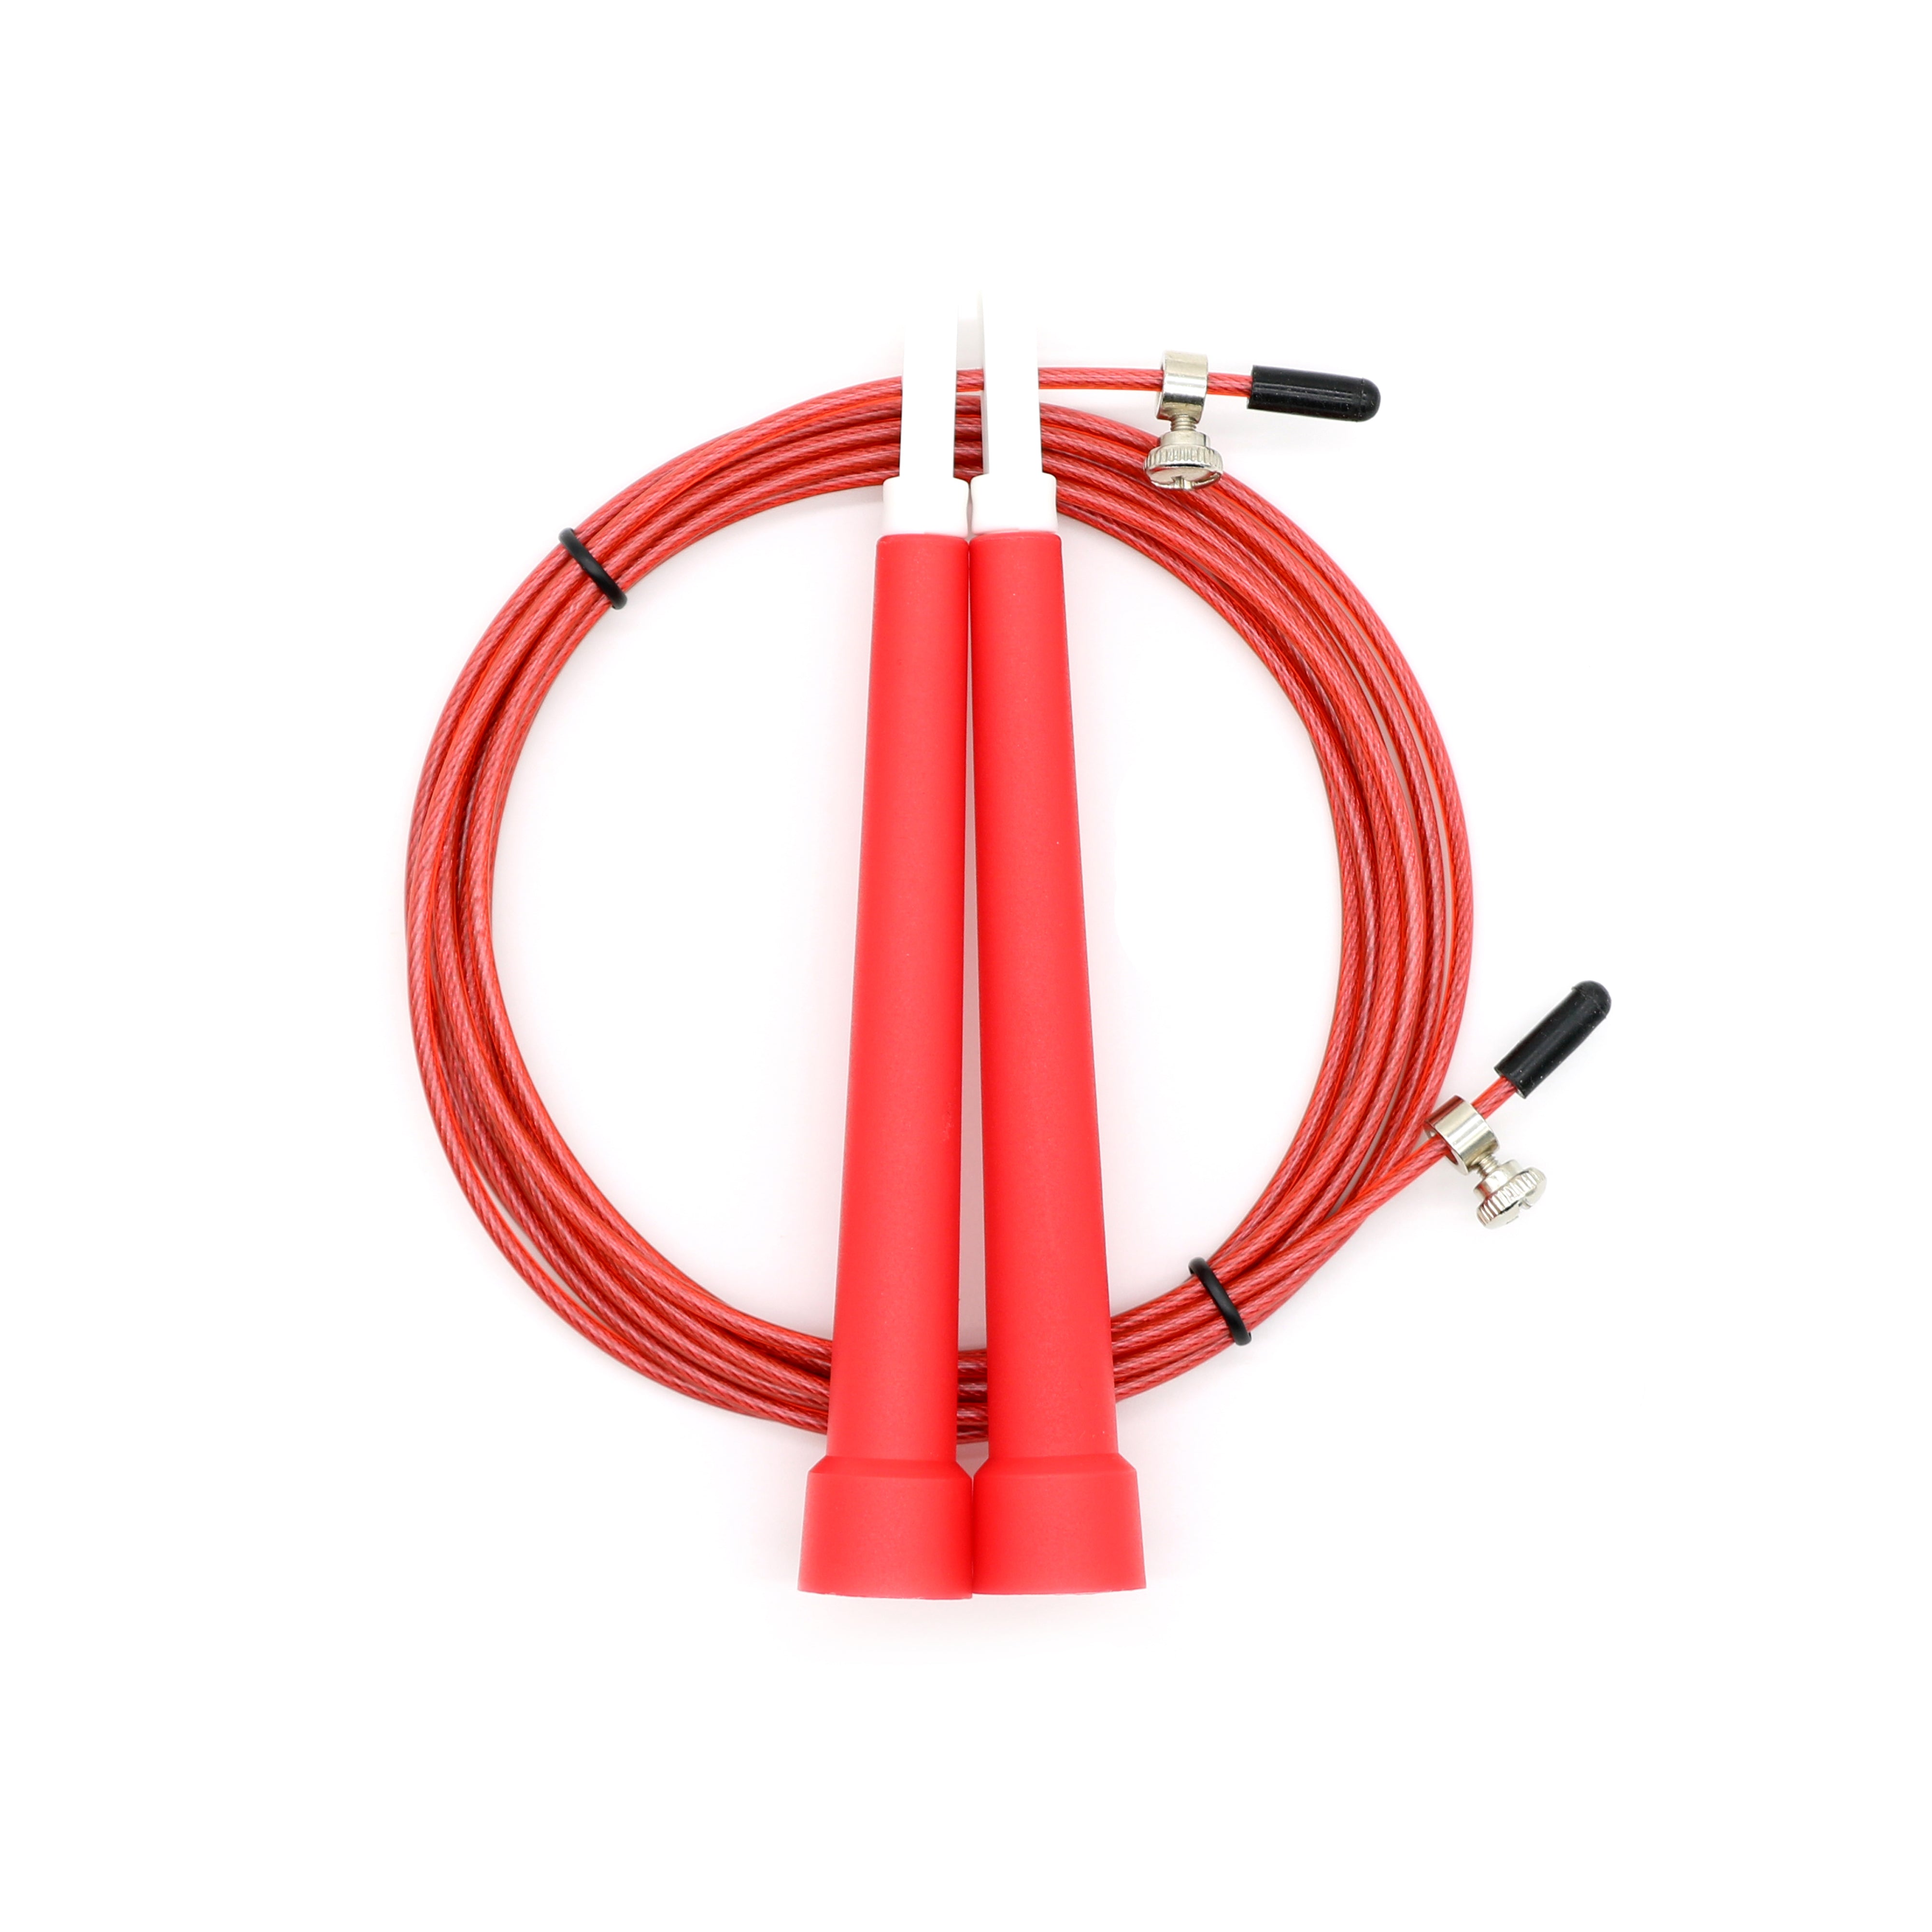 Crossfit & Boxing Jump Rope by EZB